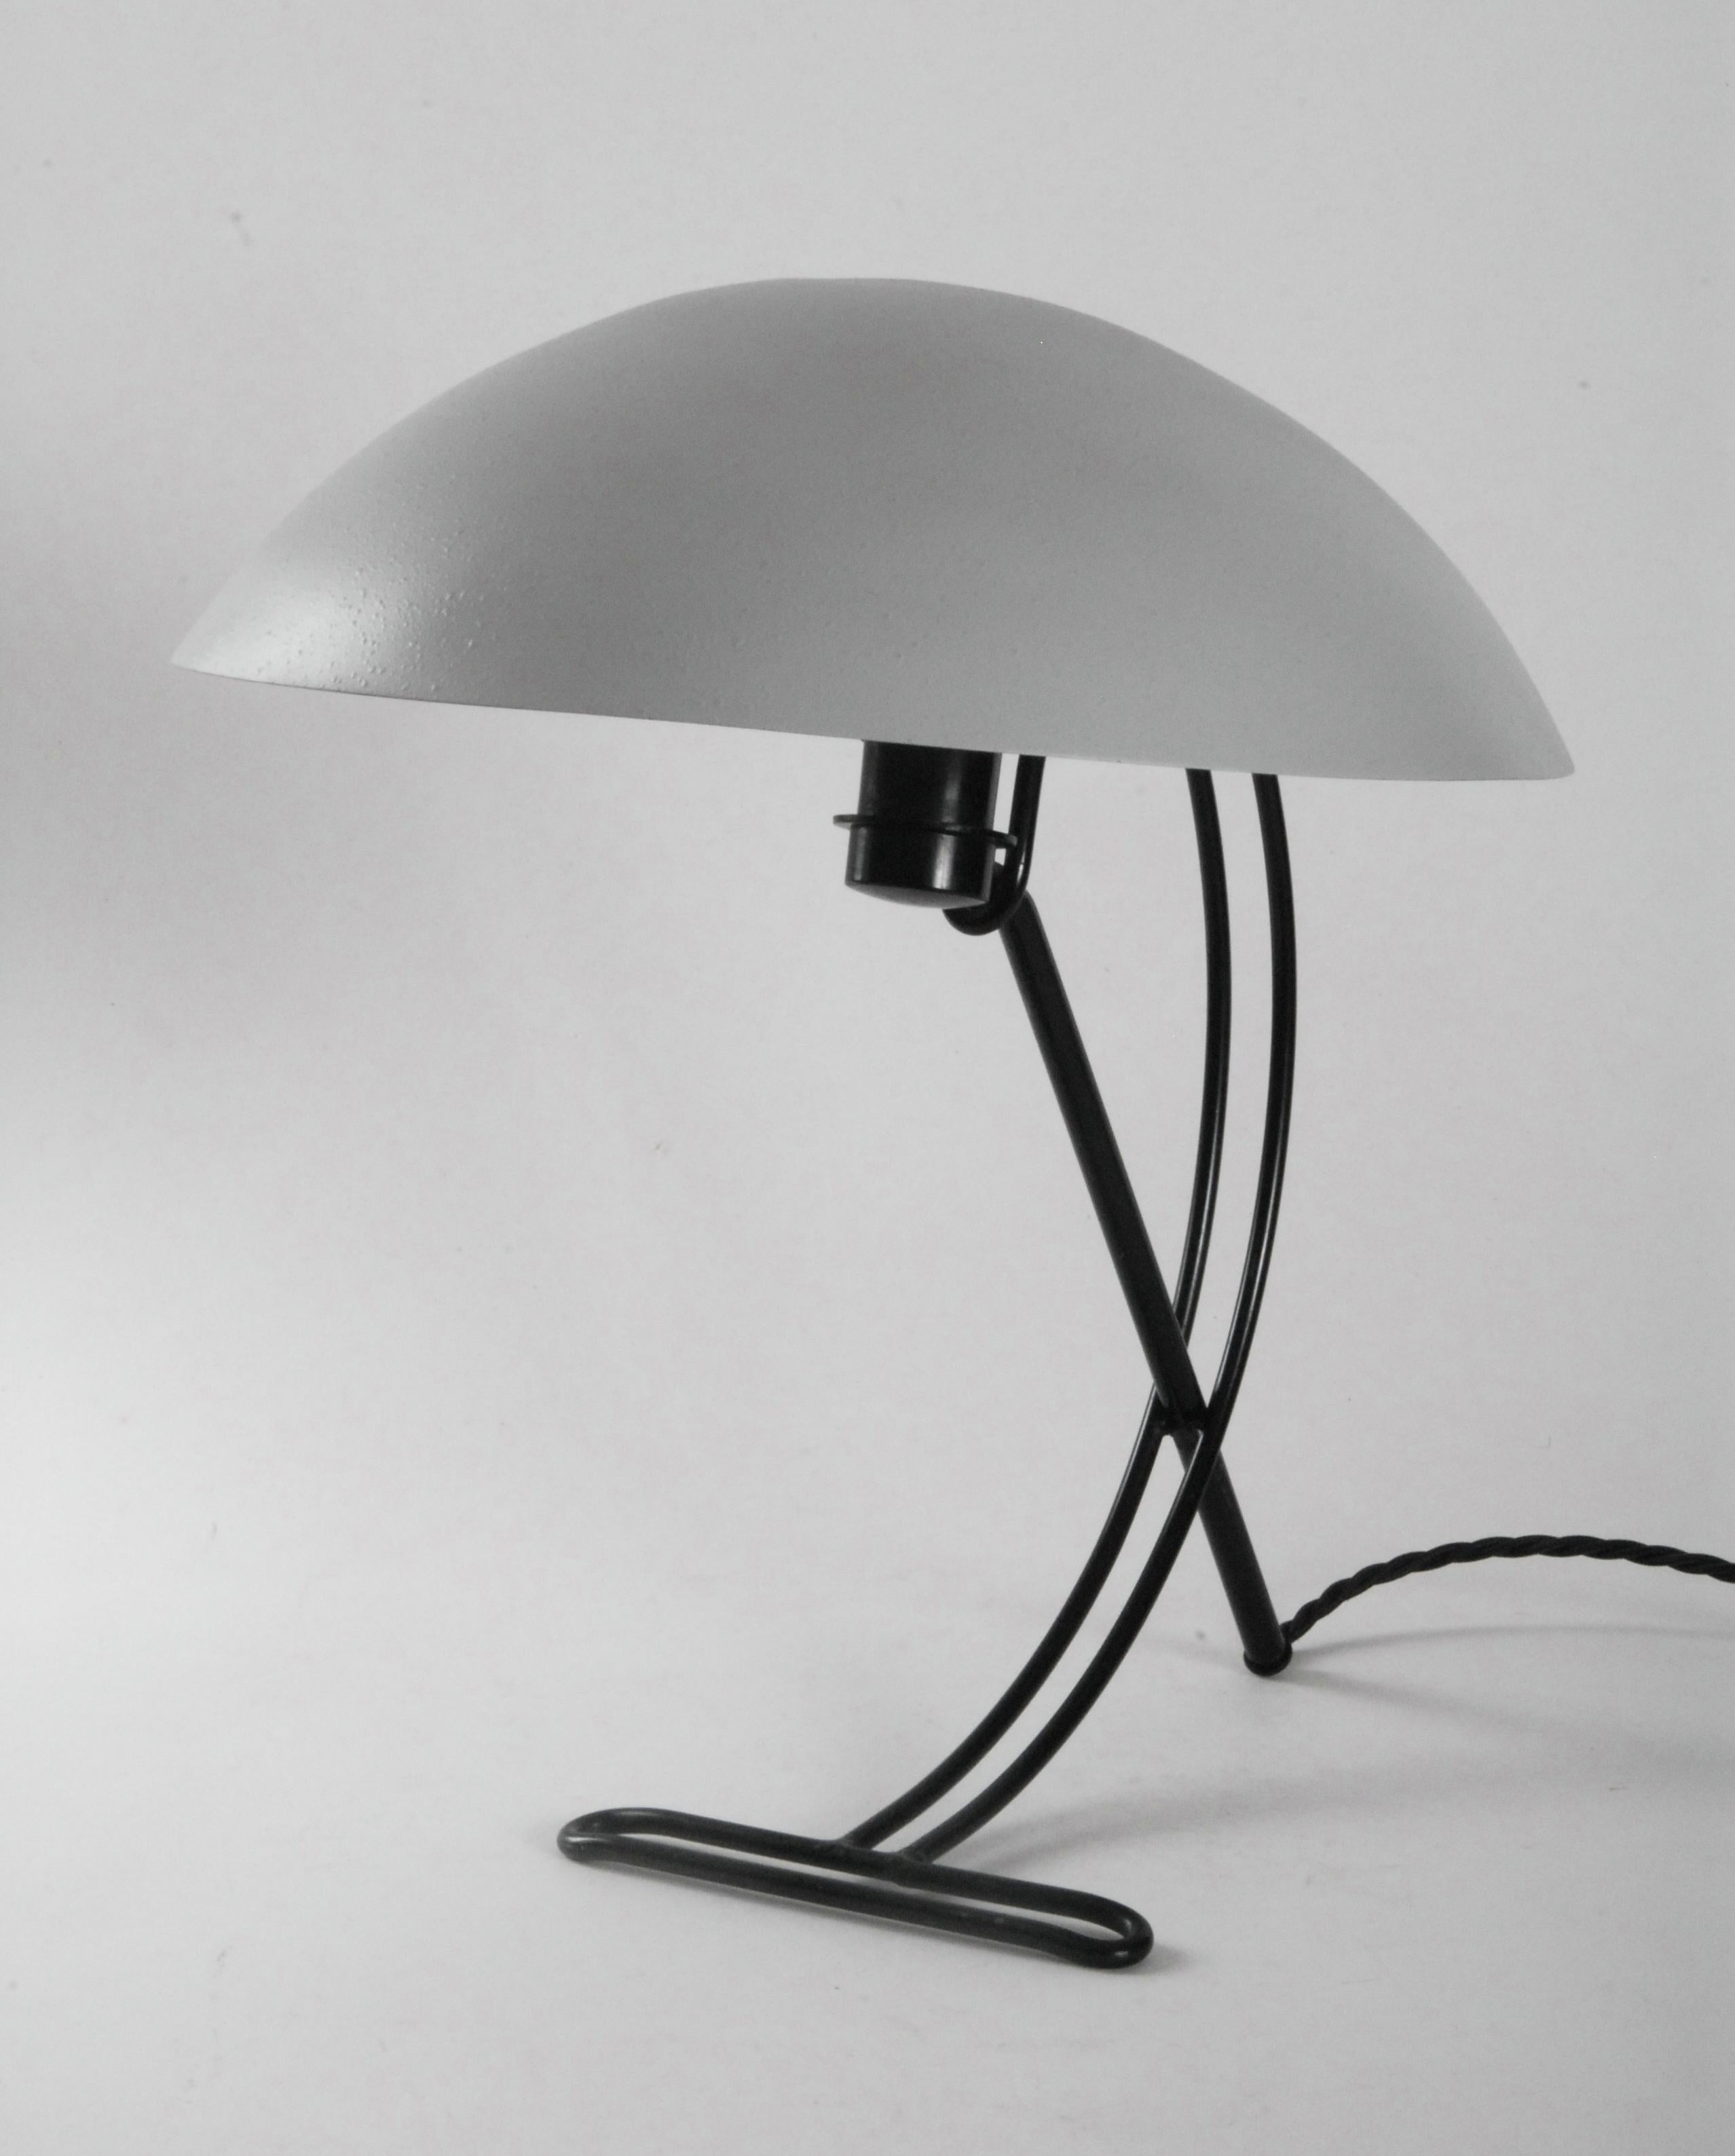 A Louis Kalff designed desk lamp from the late 1950s model NB100 with black steel frame and grey painted finish shade, re-wired with an Australian plug. It is in excellent condition.